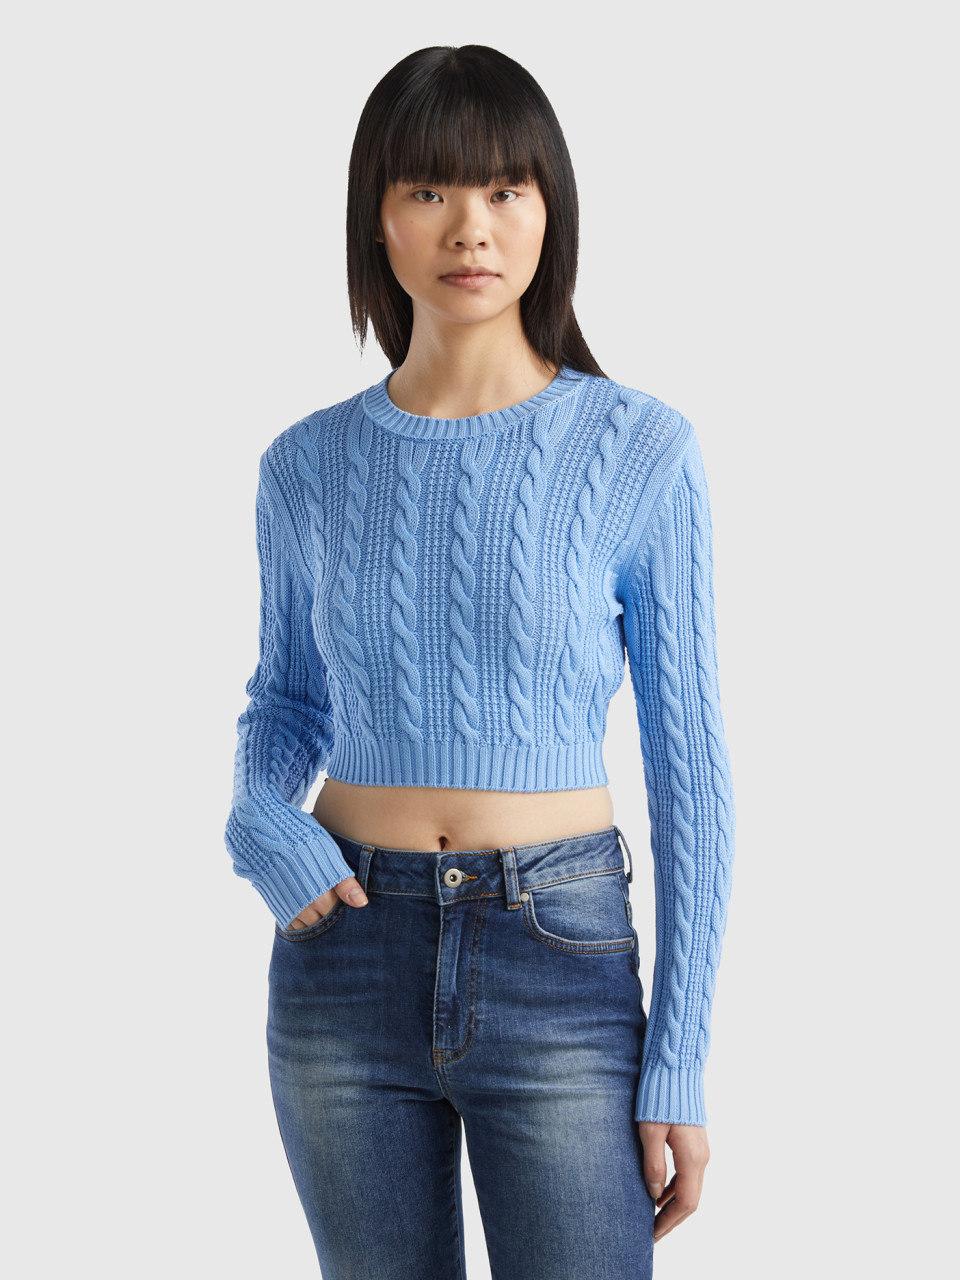 Benetton, Cropped Cable Knit Sweater, Light Blue, Women